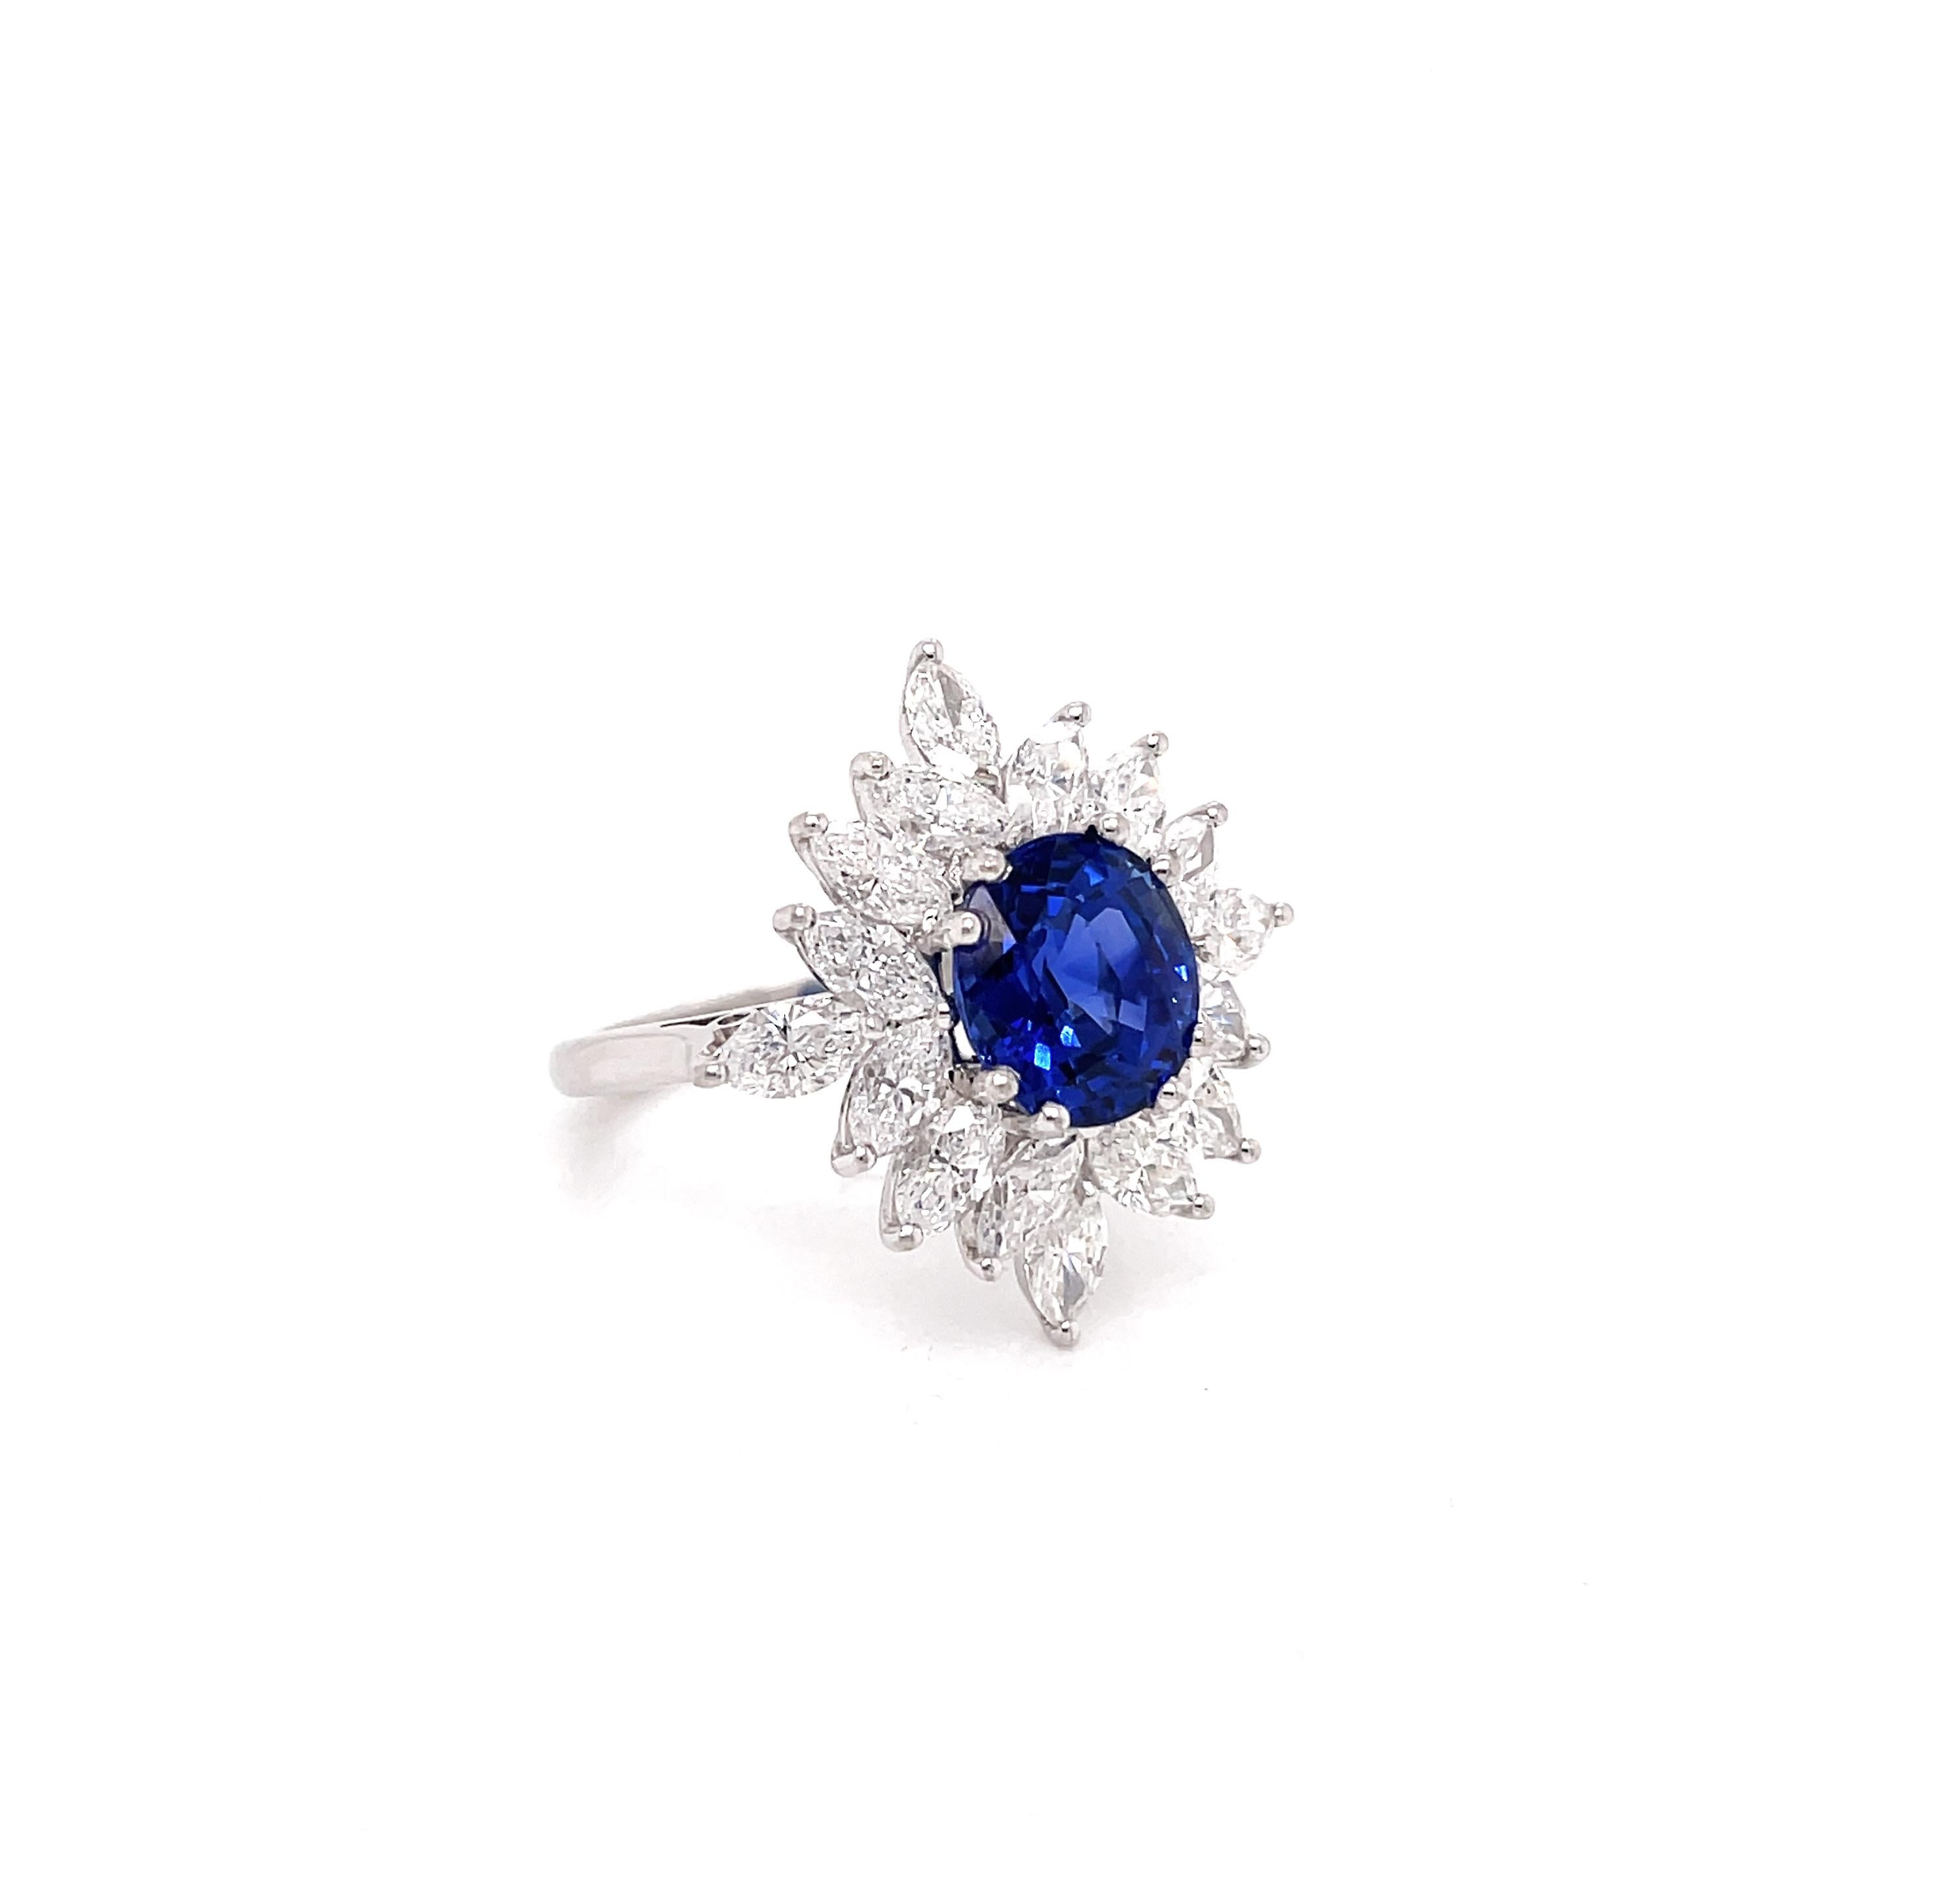 This gorgeous vintage cluster ring is set with a royal blue oval sapphire weighing 3.09ct mounted in an eight claw, open back setting. The gemstone is perfectly set in the centre of a beautiful cluster of 16 marquise shaped diamonds weighing an